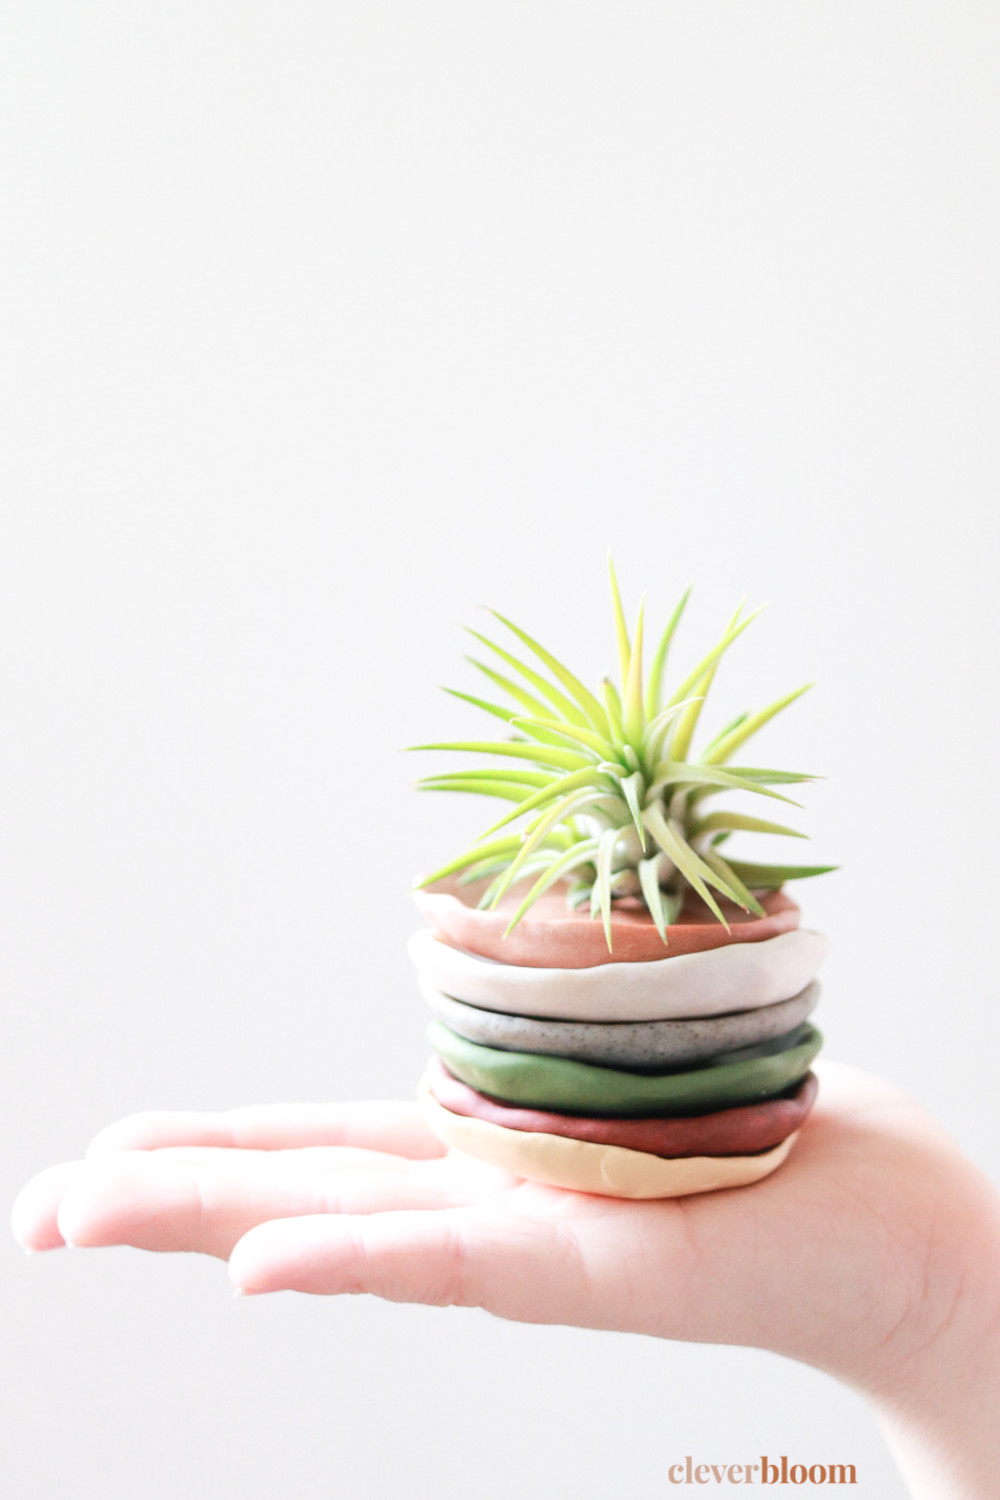 DIY Stackable Clay Plates for Air Plants are a fun, easy, and colorful way to display your air plants around the home. Learn how from Clever Bloom!